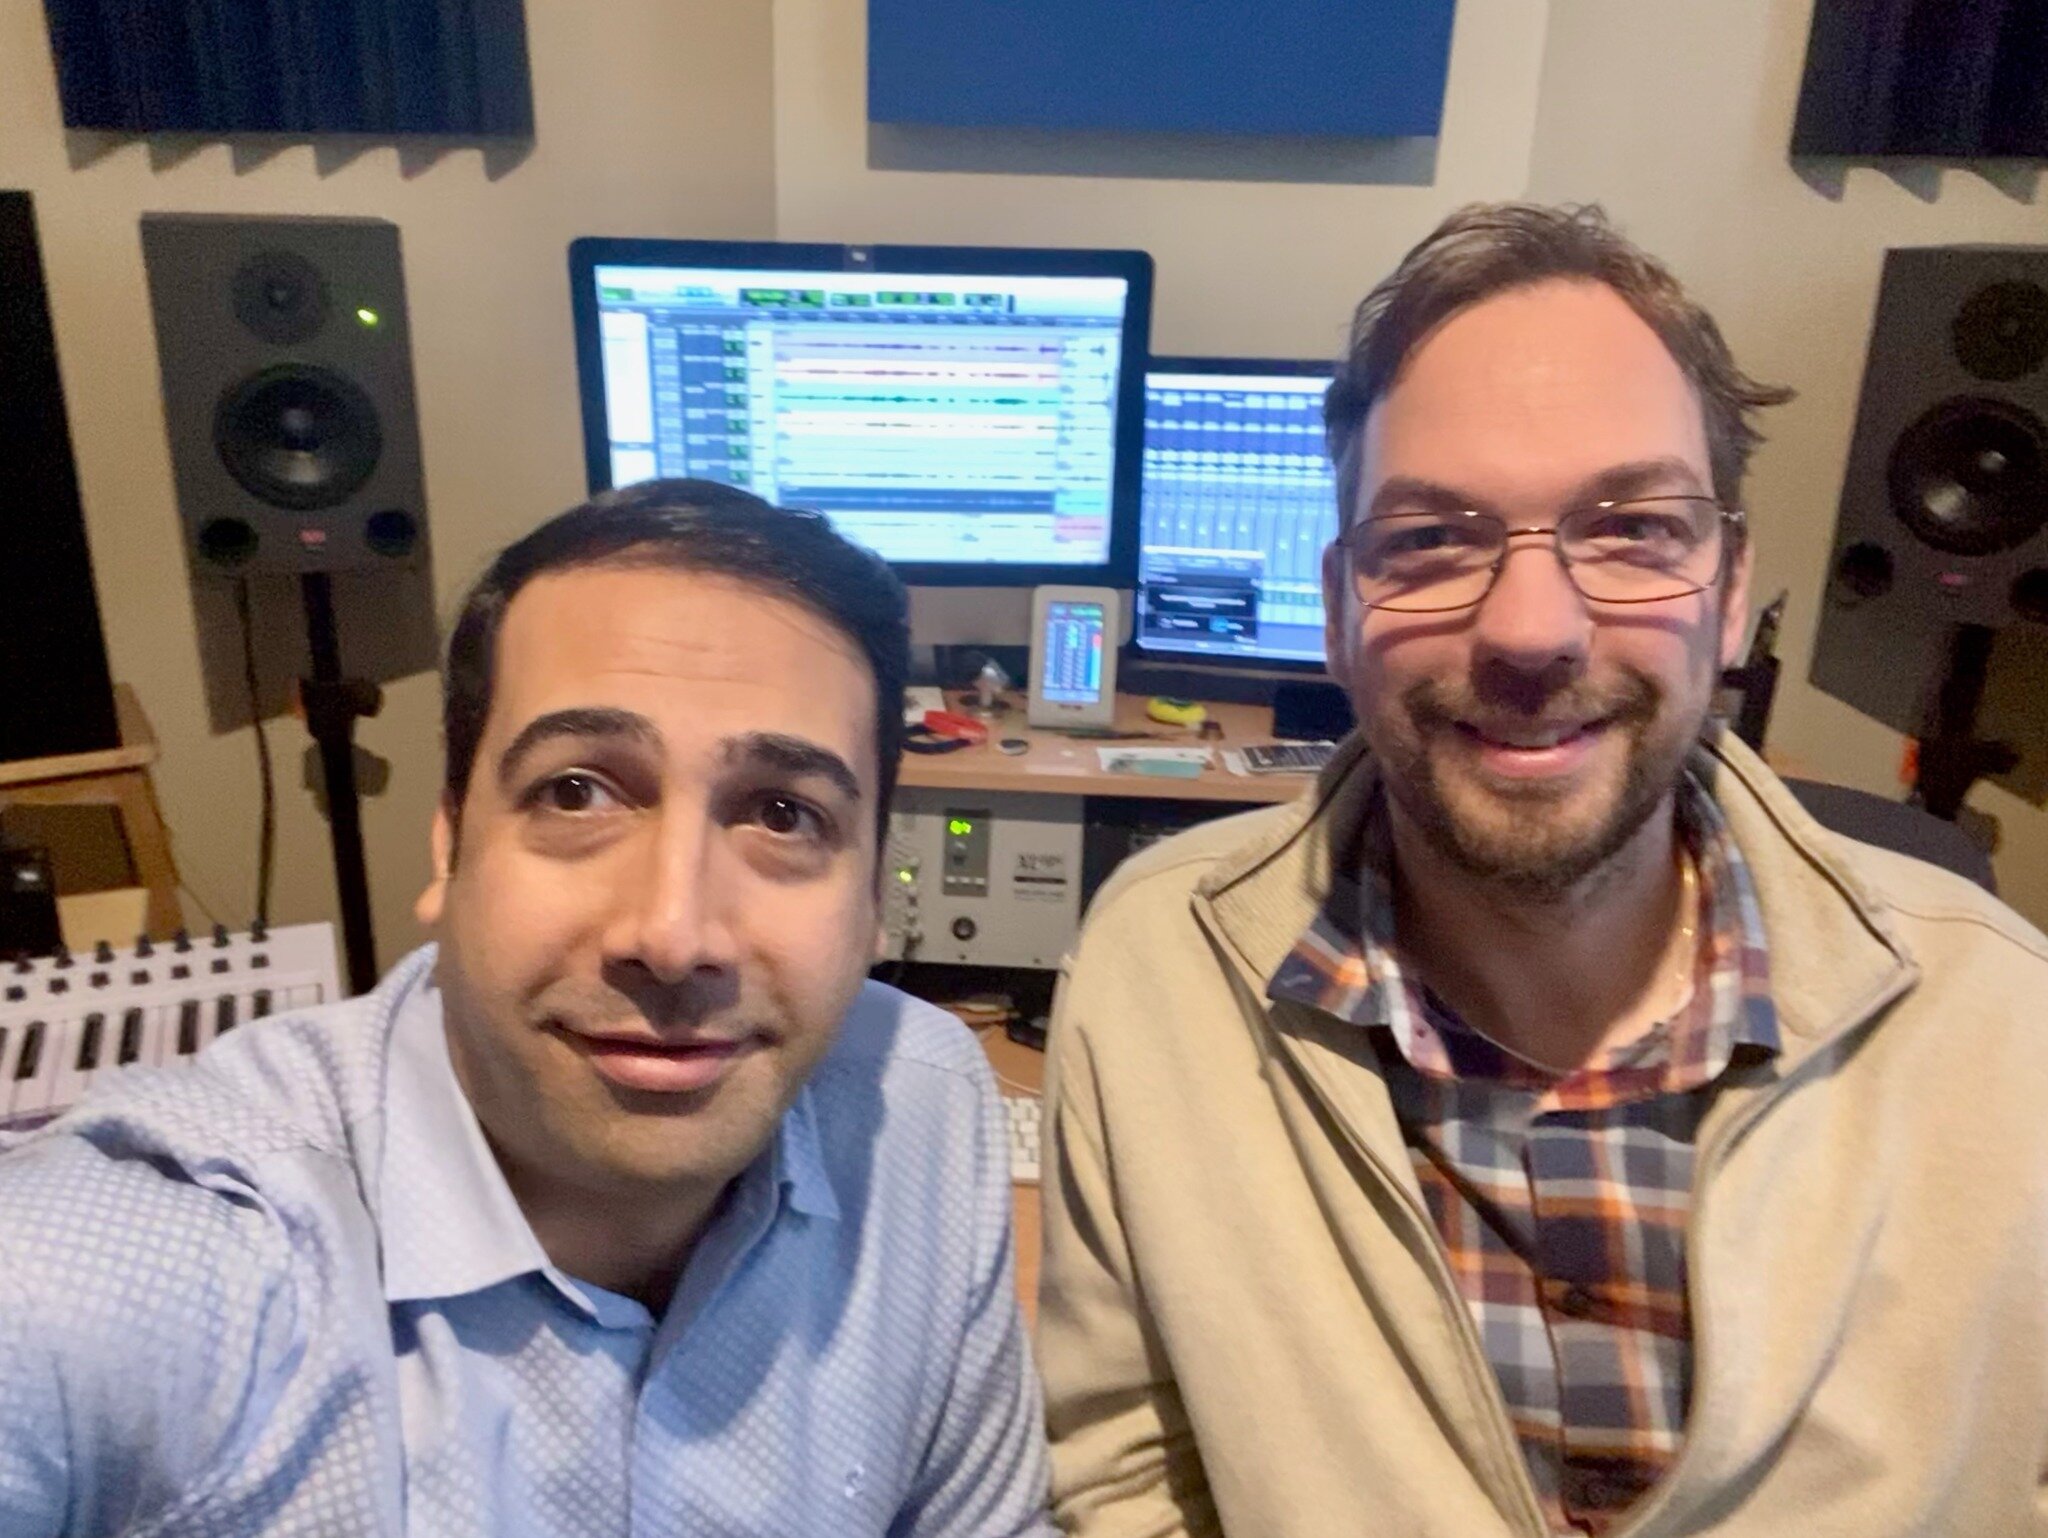 🎶 Behind the Scenes Music Editing, Mixing 🎻✨

Captured in the magic of the studio, where every note tells a story of Women, Life, and Freedom. 🌟 Today, I had the privilege to collaborate with our incredible audio engineer, weaving together the sou